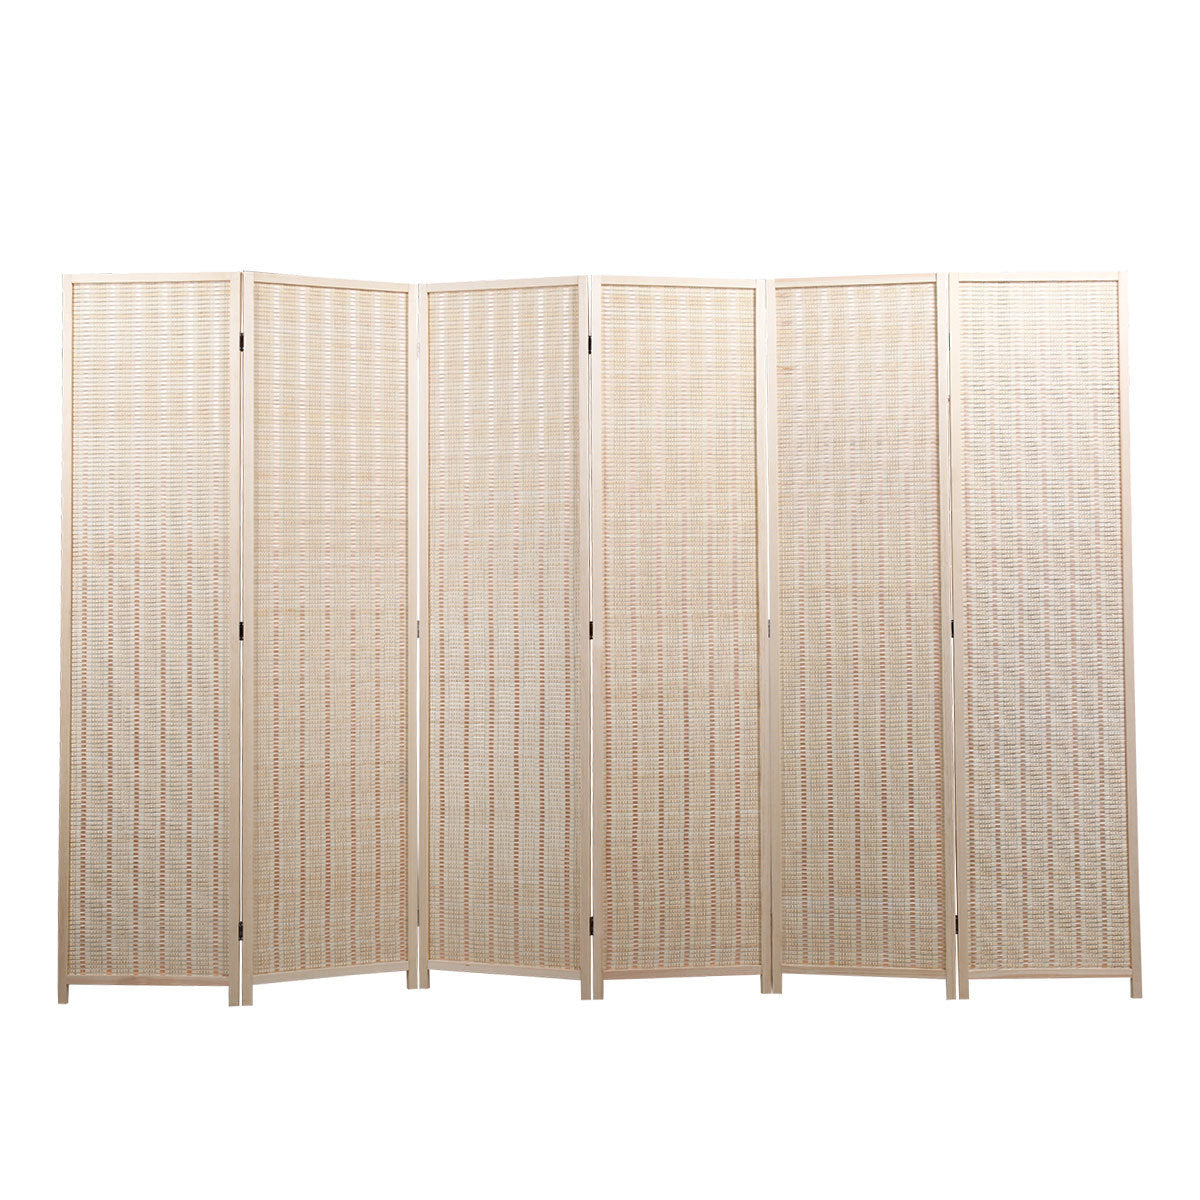 6 Panel Bamboo Room Divider, Private Folding